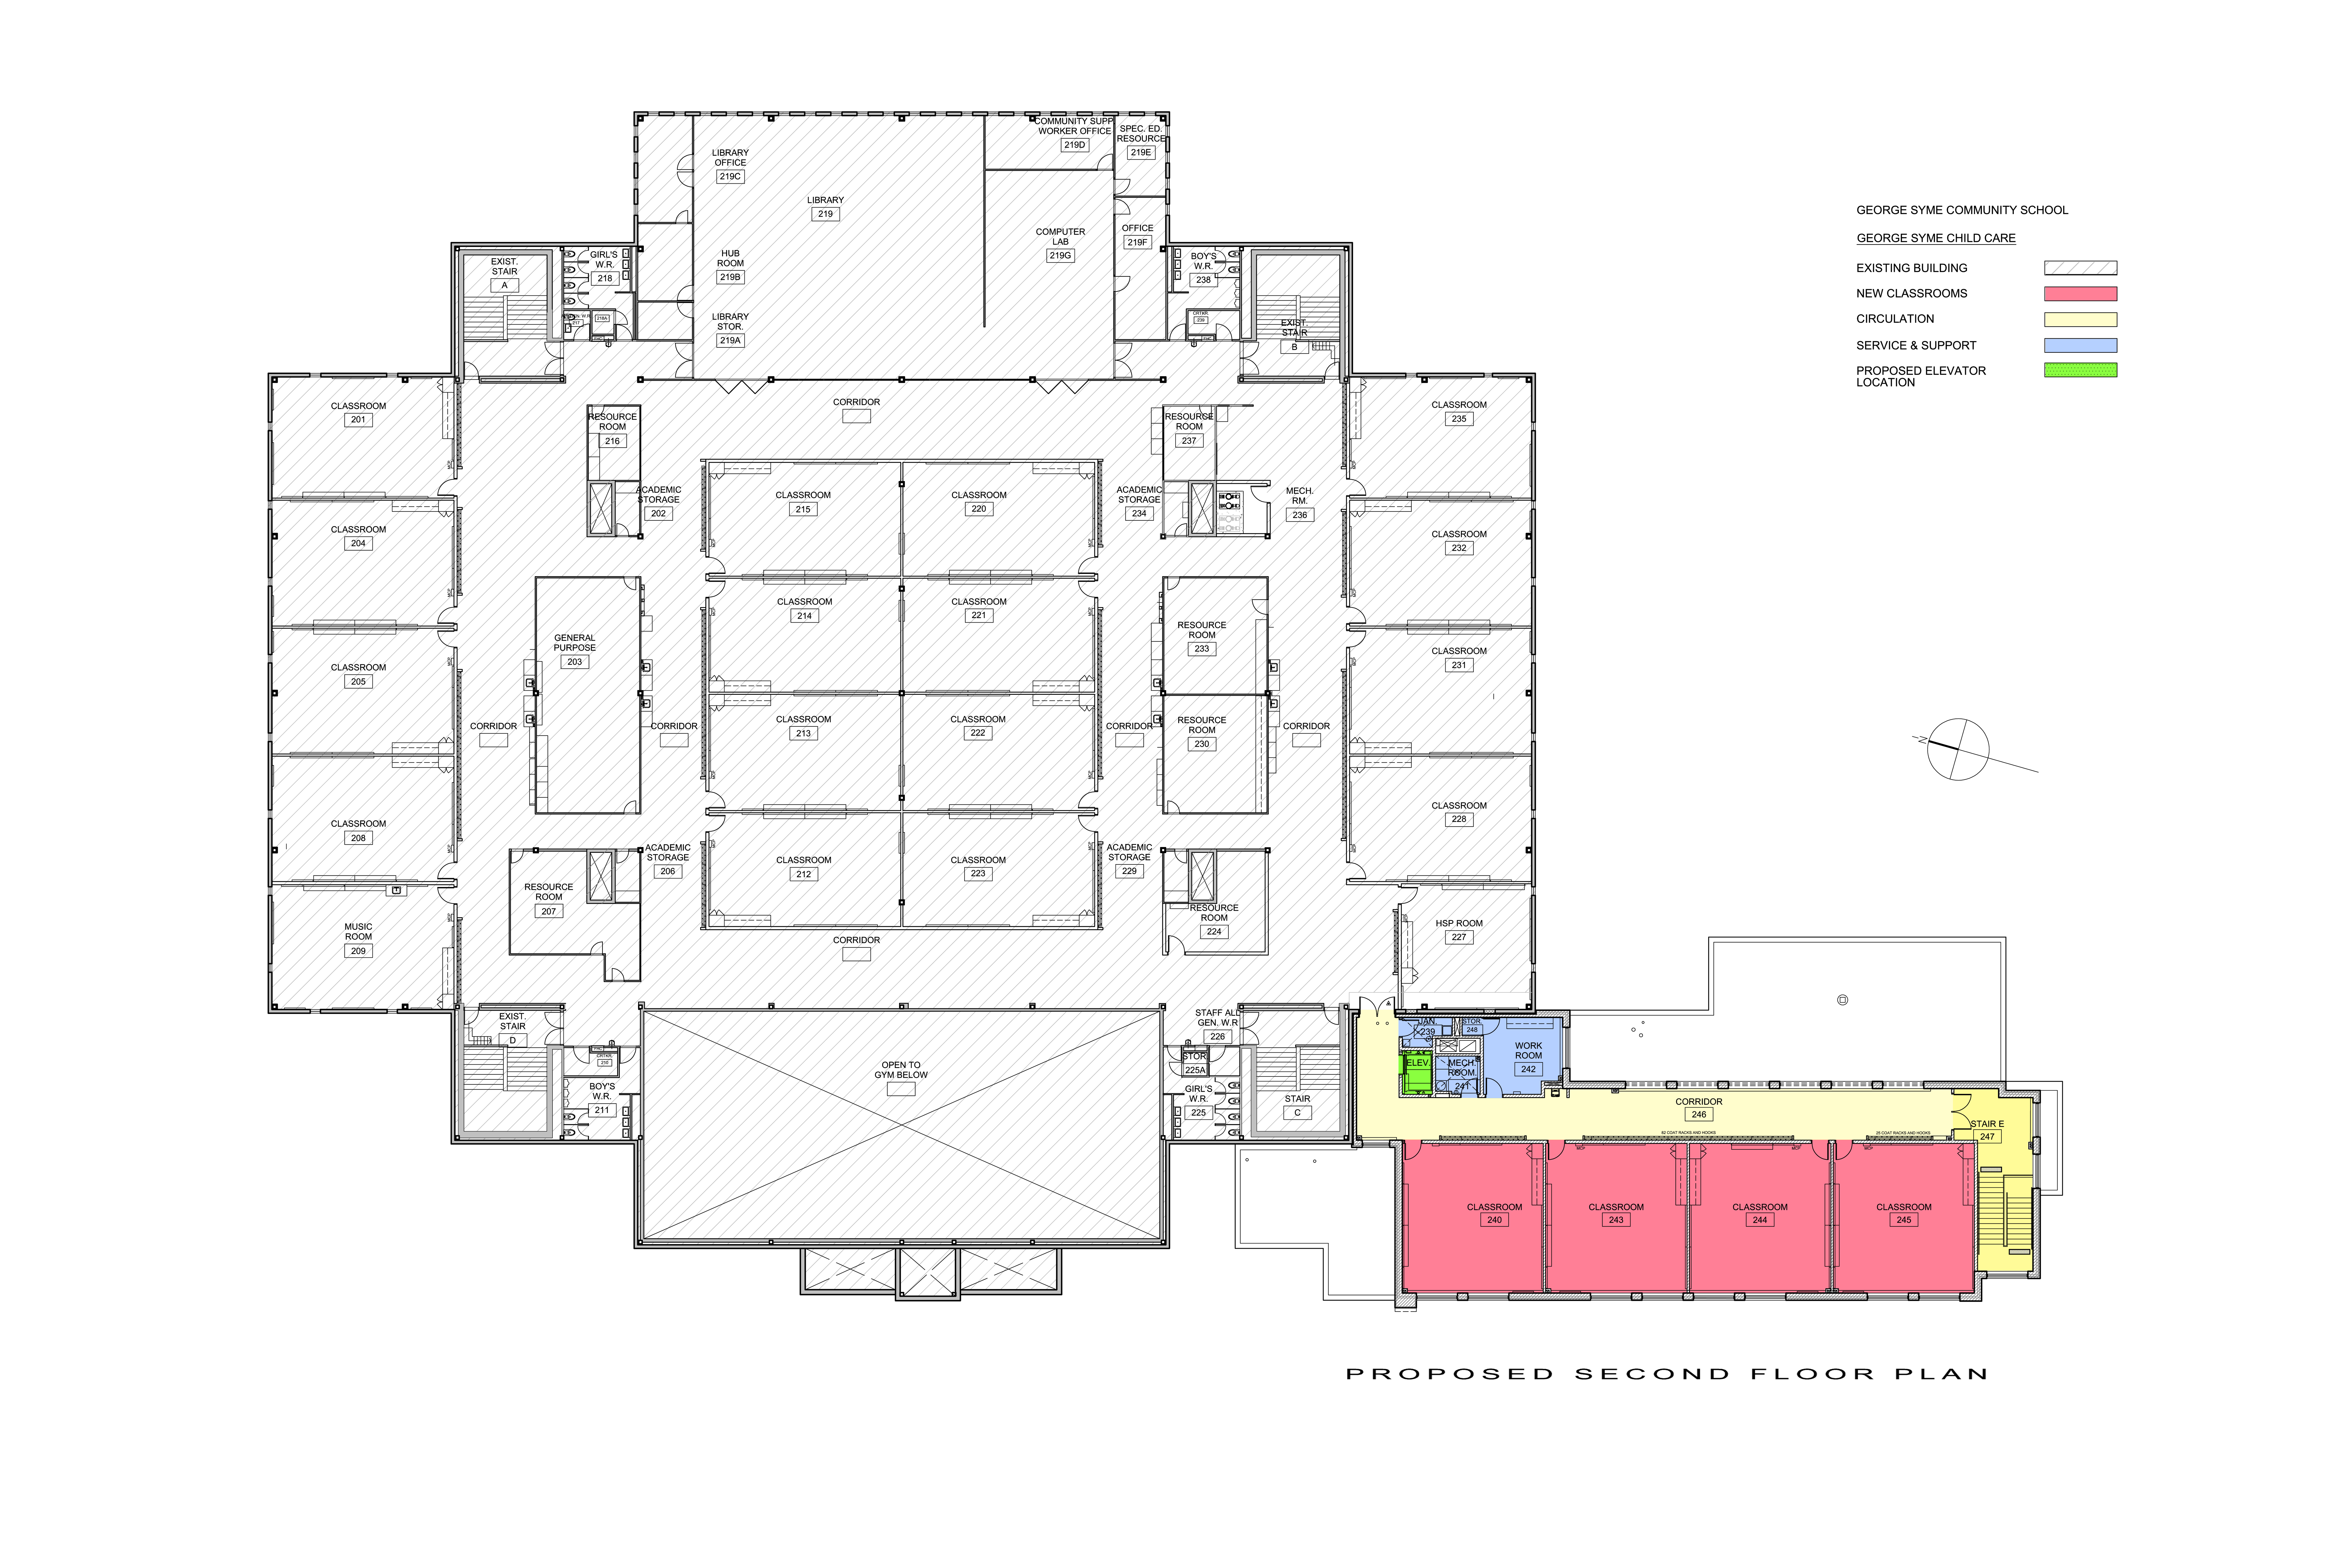 Architectural second floor plan looking down from above depicting instructional & operations spaces situated on the second floor after the project is completed. Open Gallery